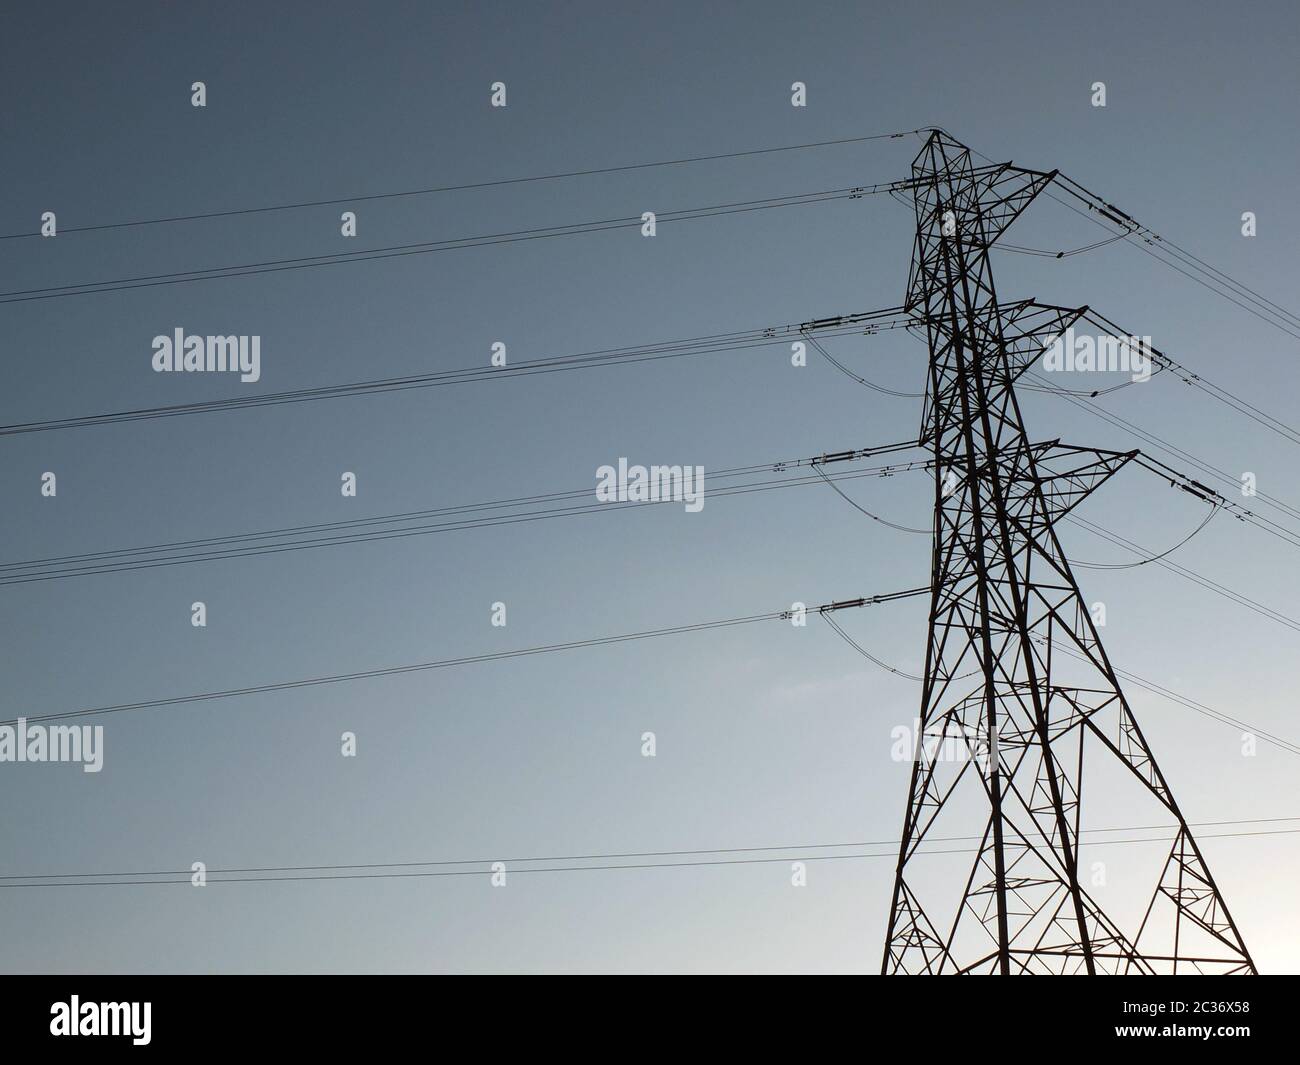 a tall electricity pylon with multiple high voltage cables silhouetted against a blue sky Stock Photo